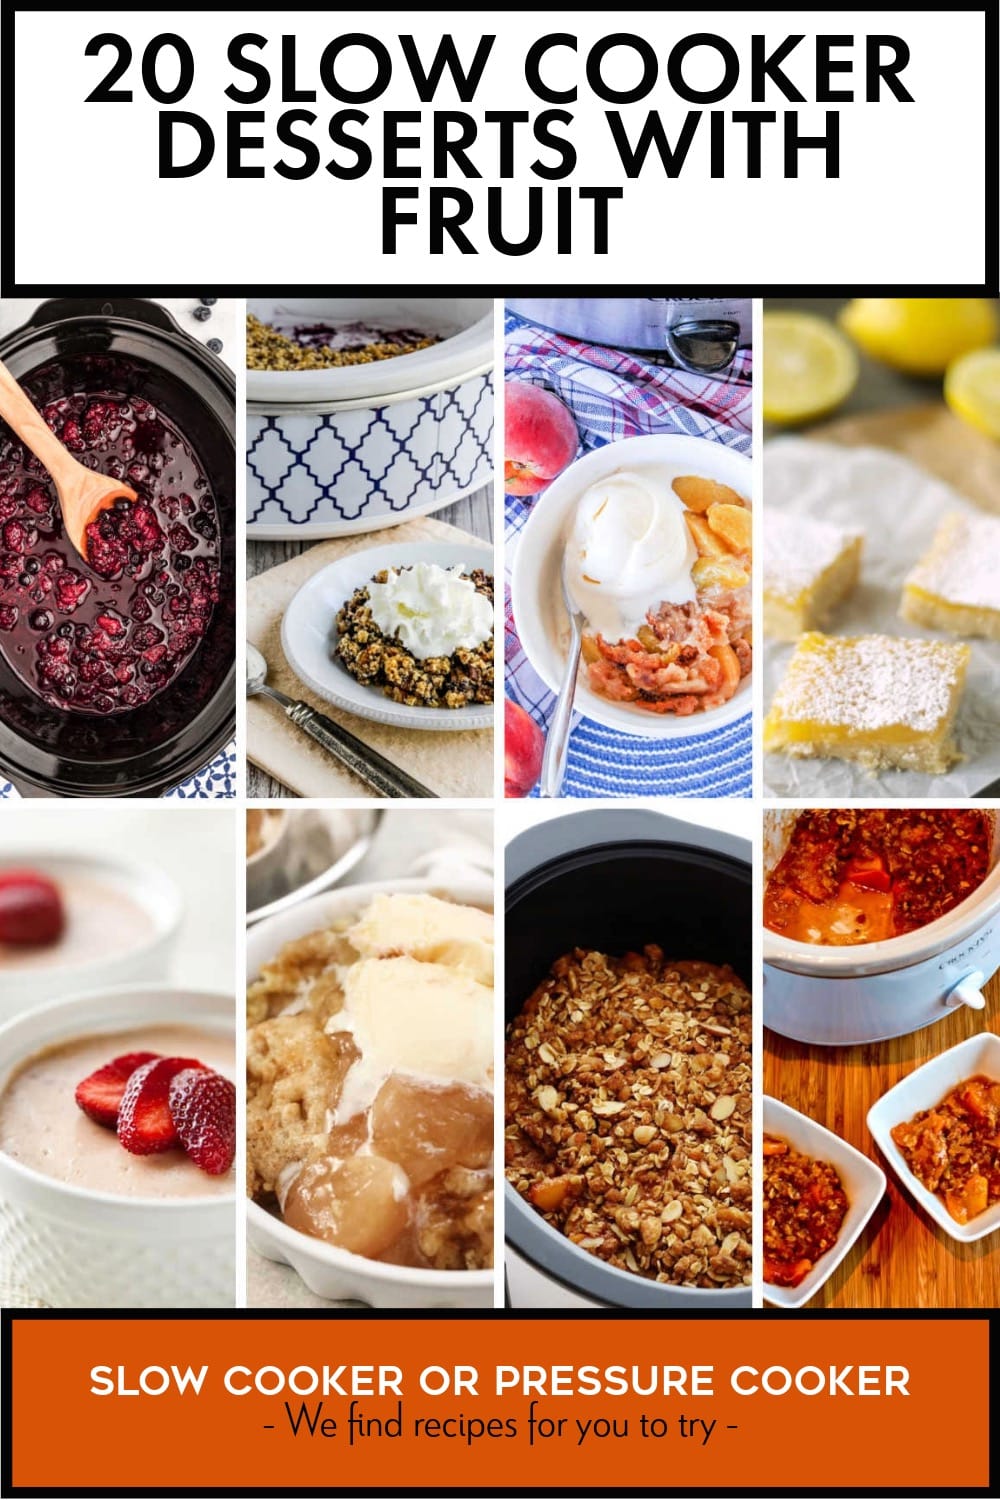 Pinterest image of 20 Slow Cooker Desserts with Fruit